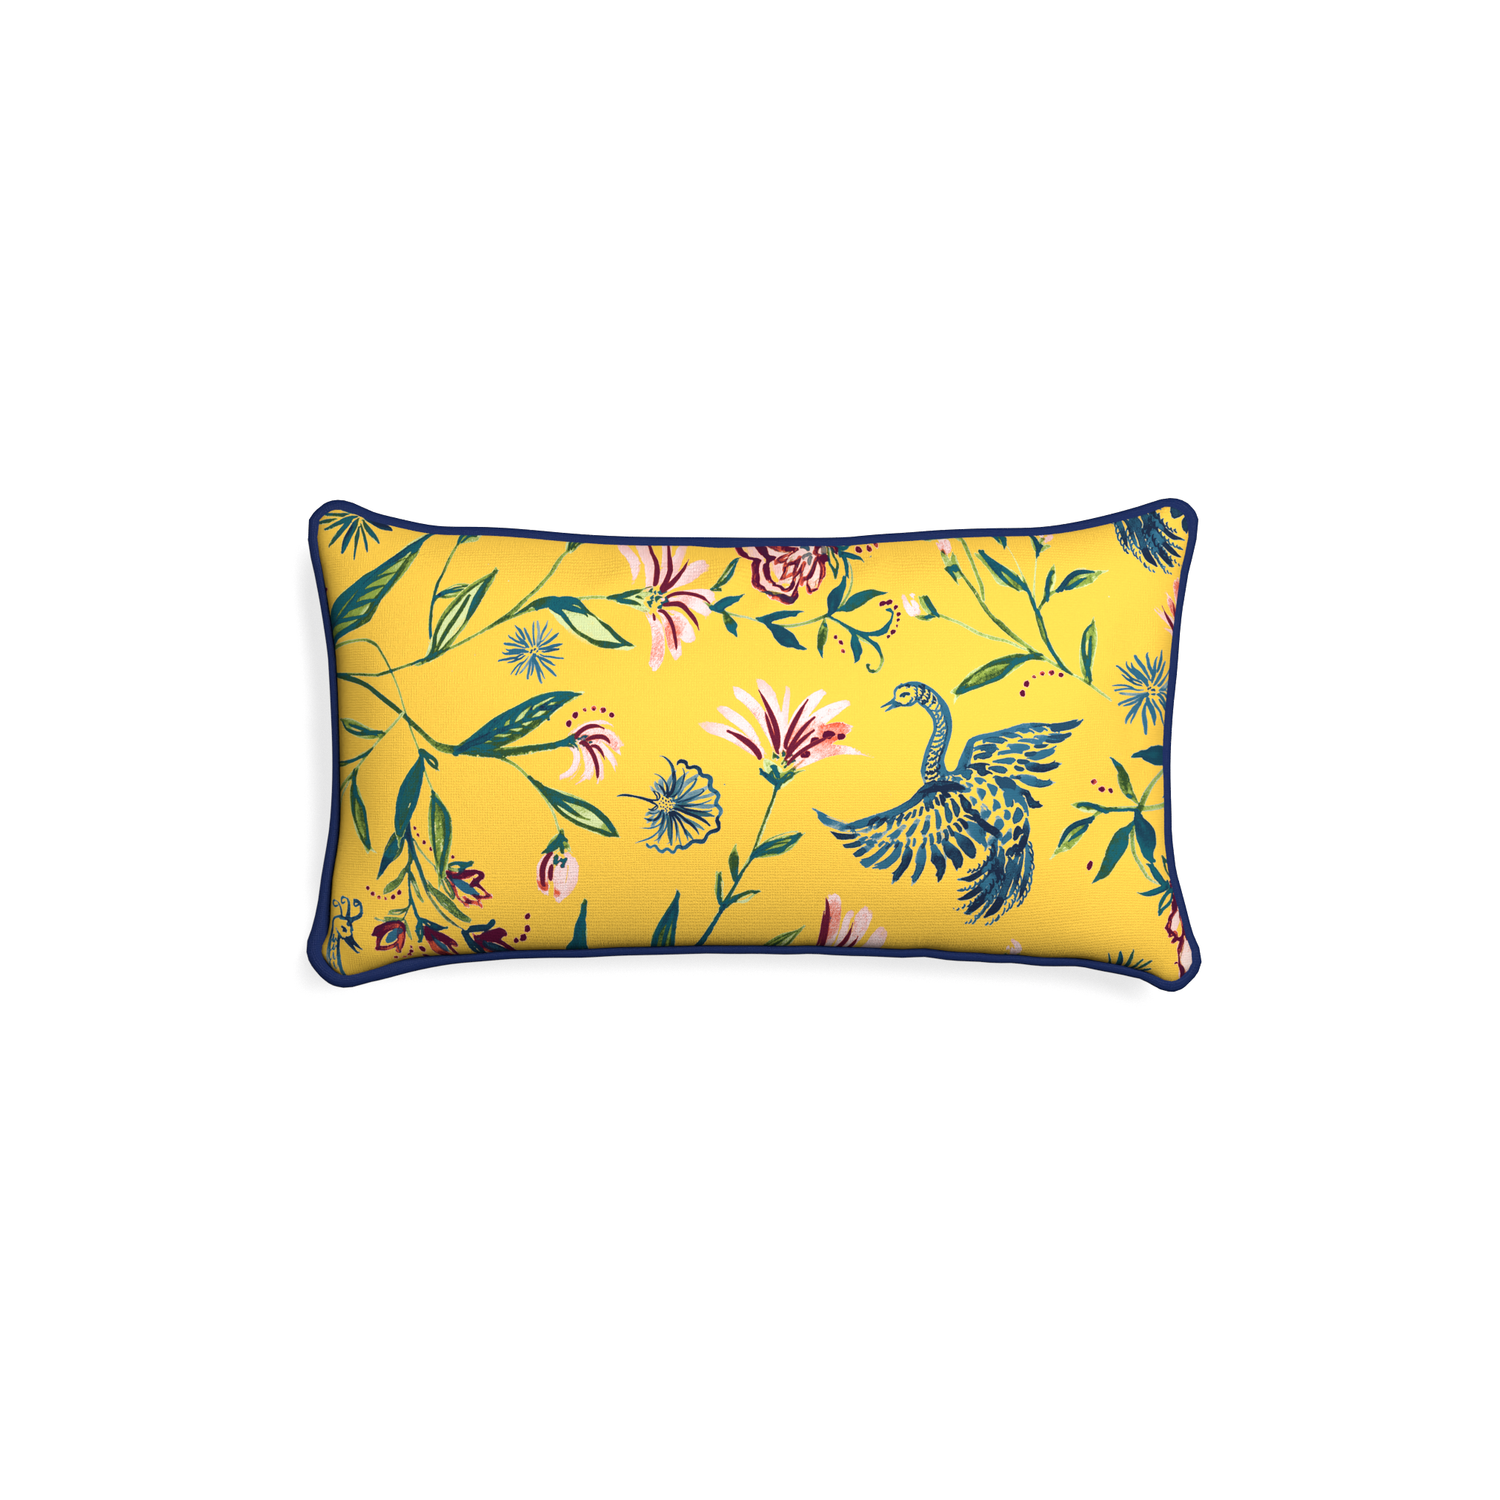 Petite-lumbar daphne canary custom yellow chinoiseriepillow with midnight piping on white background